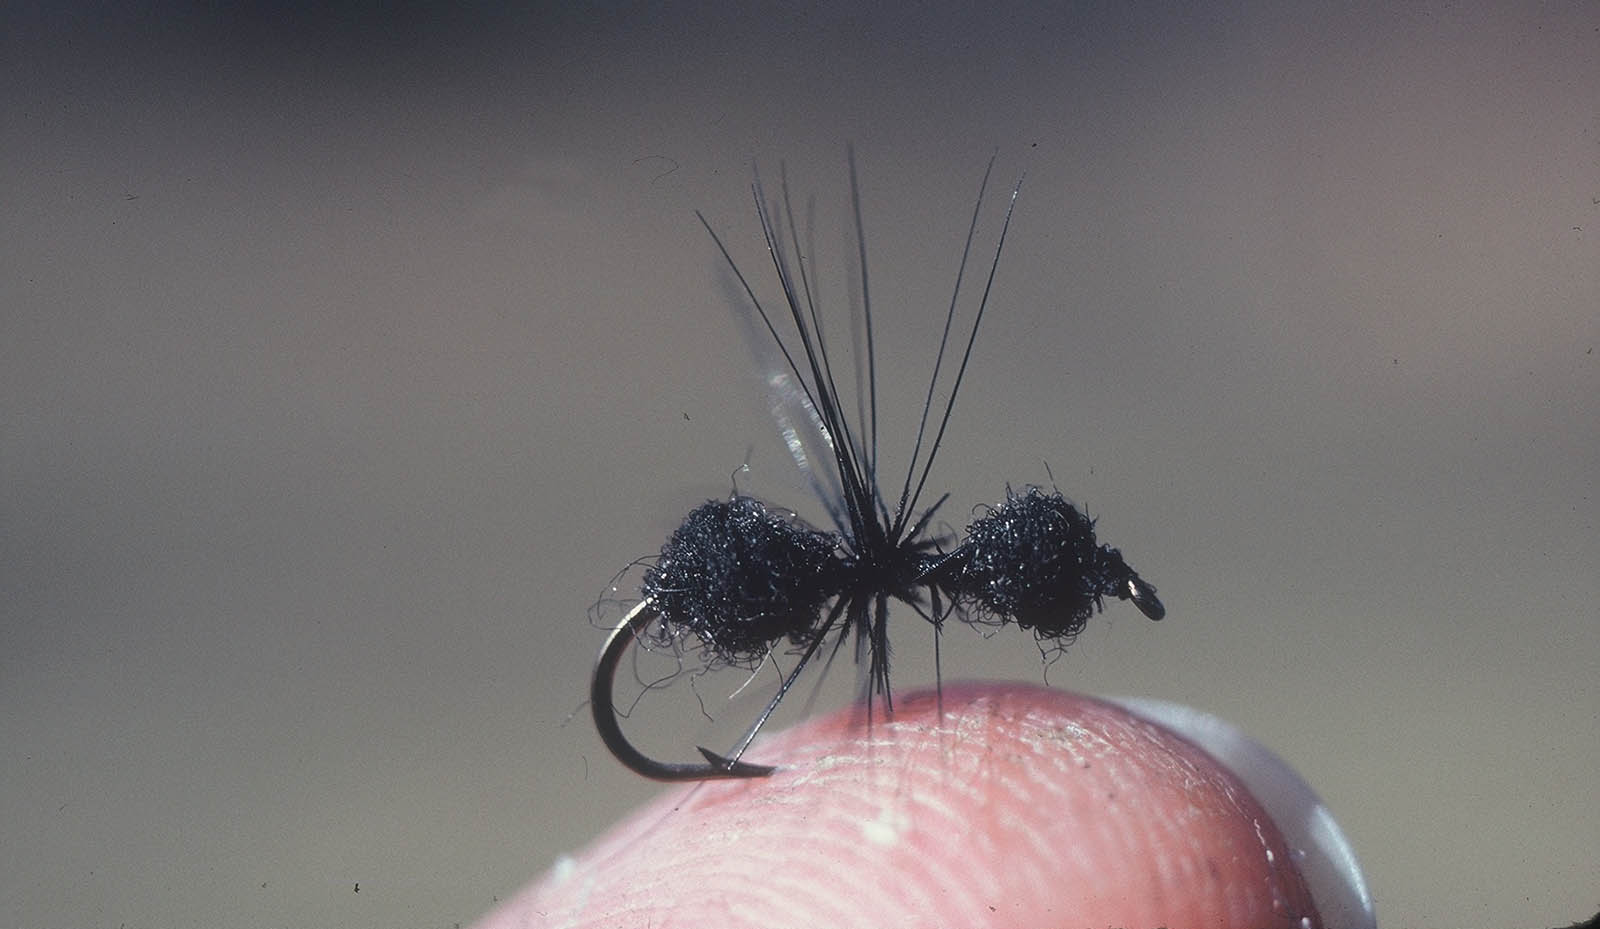 An image of a minuet fishing fly tied to appear to be a black ant which is effective in catching Panfish in the summer.